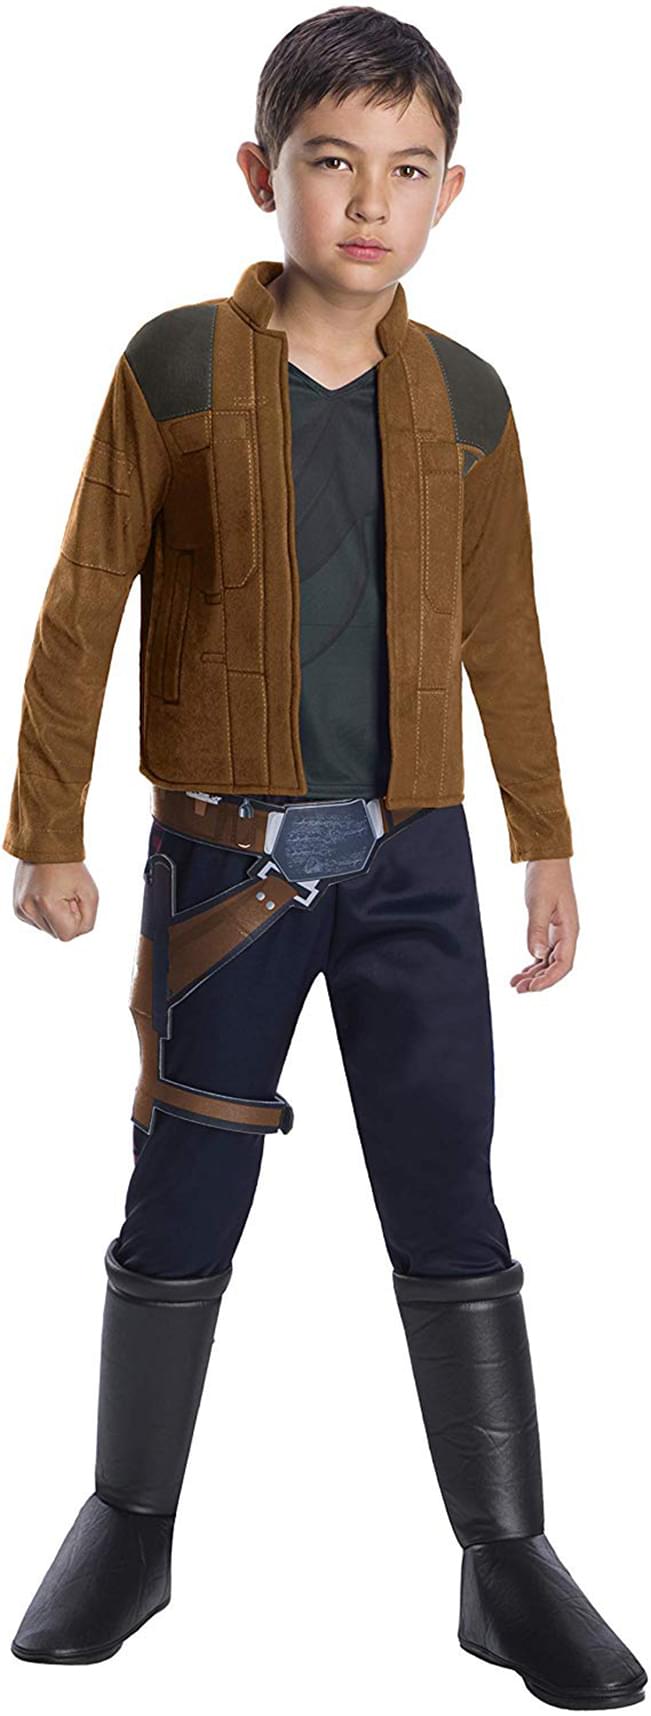 Solo A Star Wars Story Han Solo Deluxe Child Costume